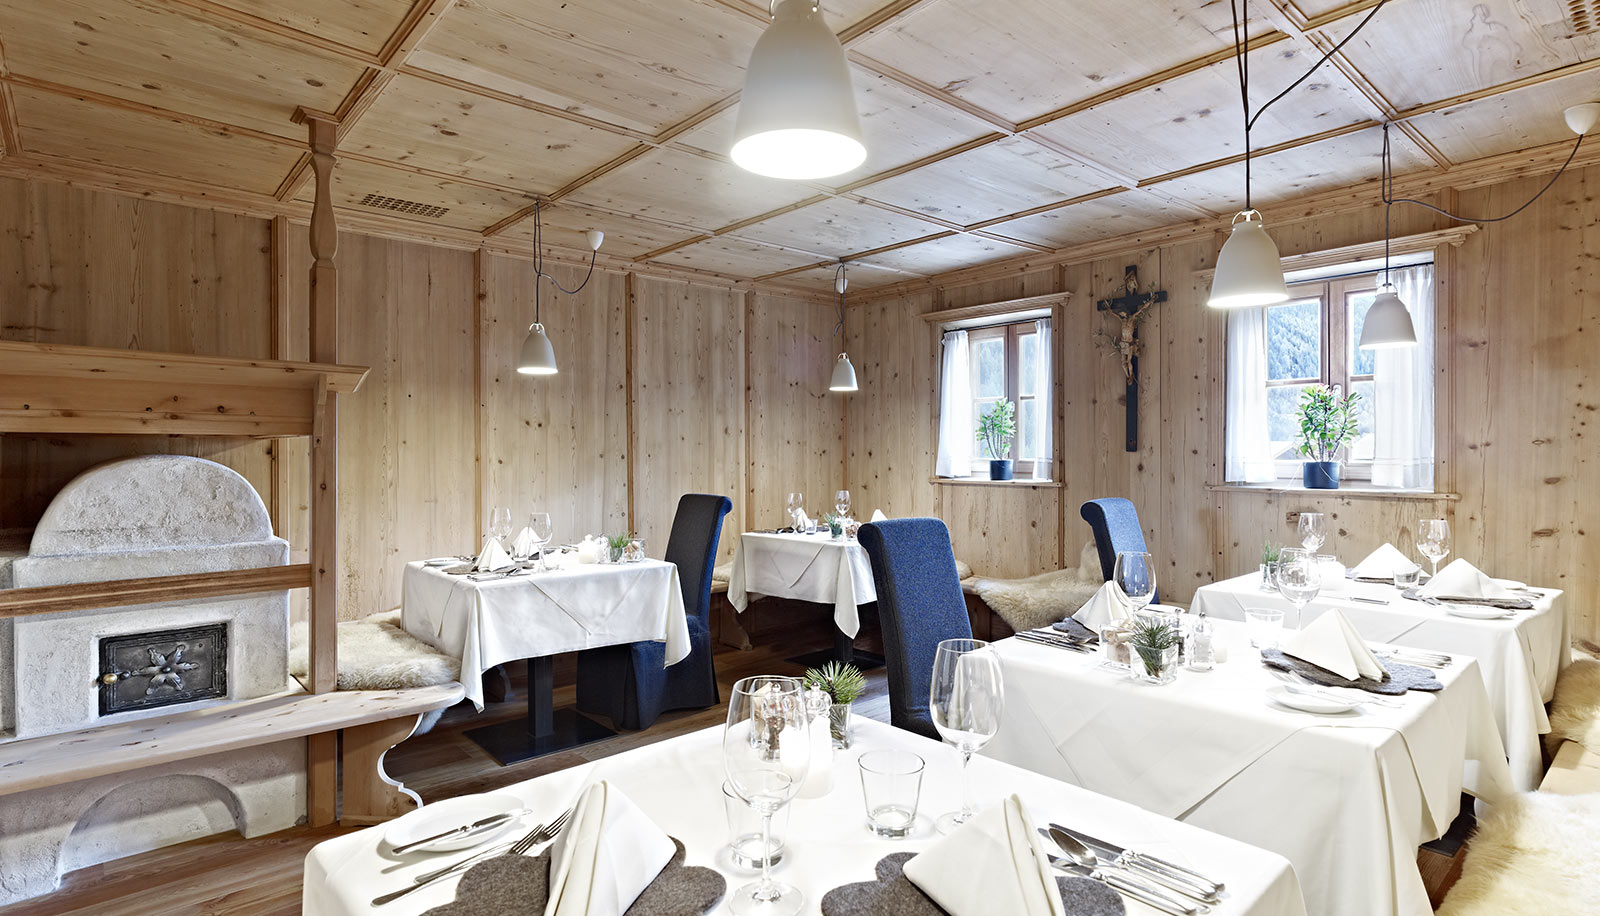 Wooden panelled, light stube with stove and set tables at Arosea Life Balance Hotel in Ultental-Val d'Ultimo